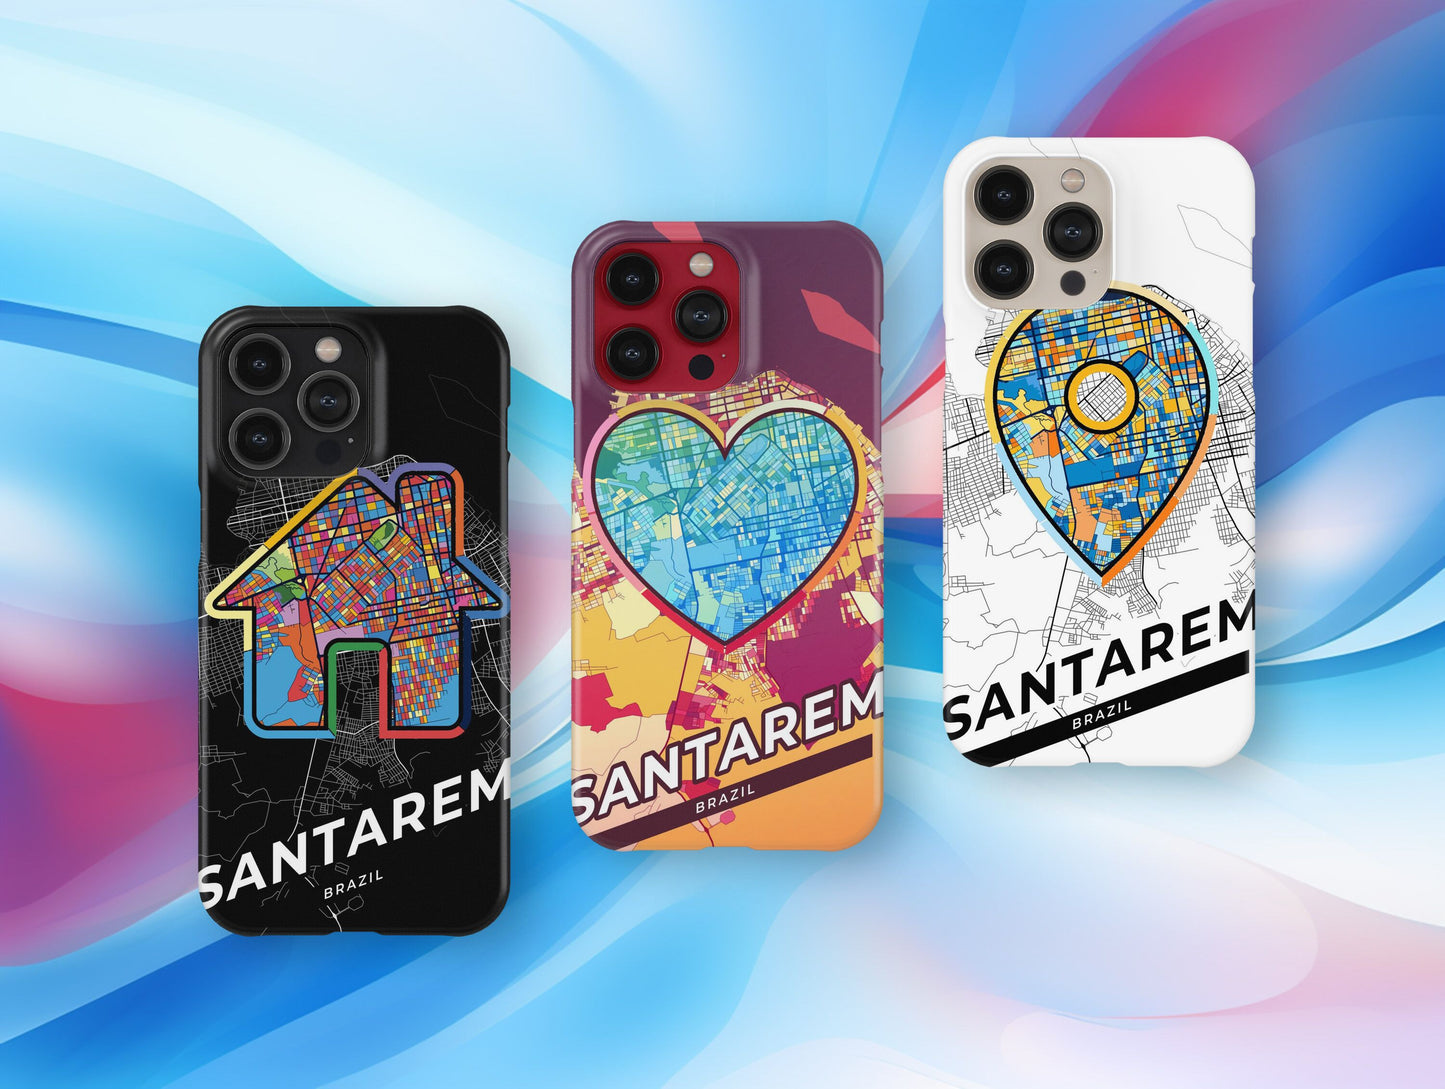 Santarem Brazil slim phone case with colorful icon. Birthday, wedding or housewarming gift. Couple match cases.